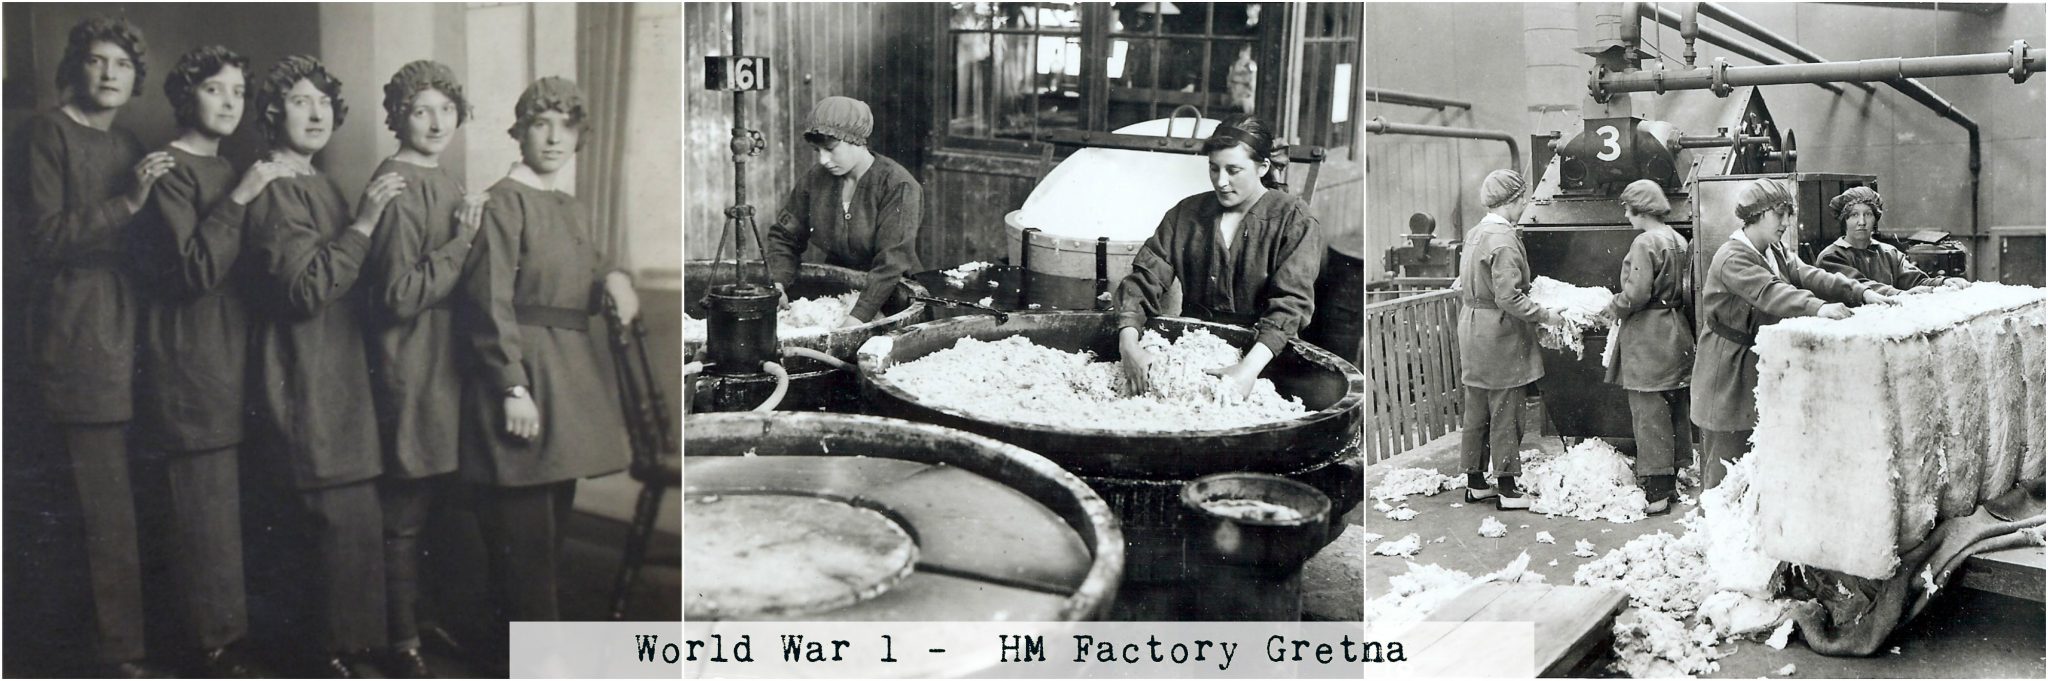 A collage of three photos. From left to right these are of: A row of five munition workers in uniform, two munition workers mixing a porridge like substance in large pans and four munition workers working with a large bale of material. Text at the lowest edge of the photos reads "World War 1 - HM Factory Gretna."